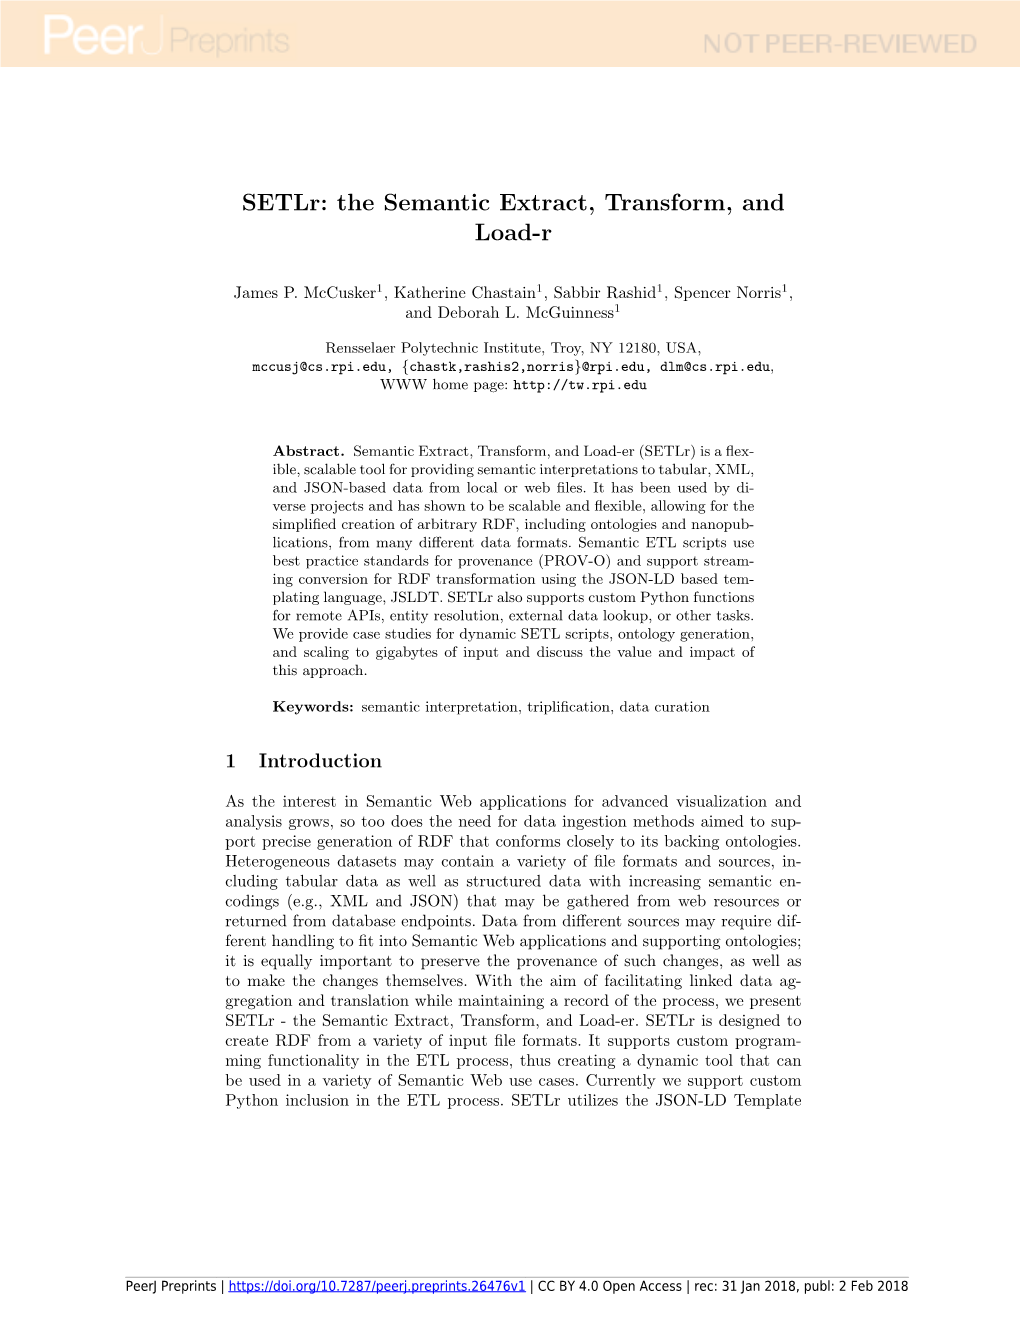 The Semantic Extract, Transform, and Load-R